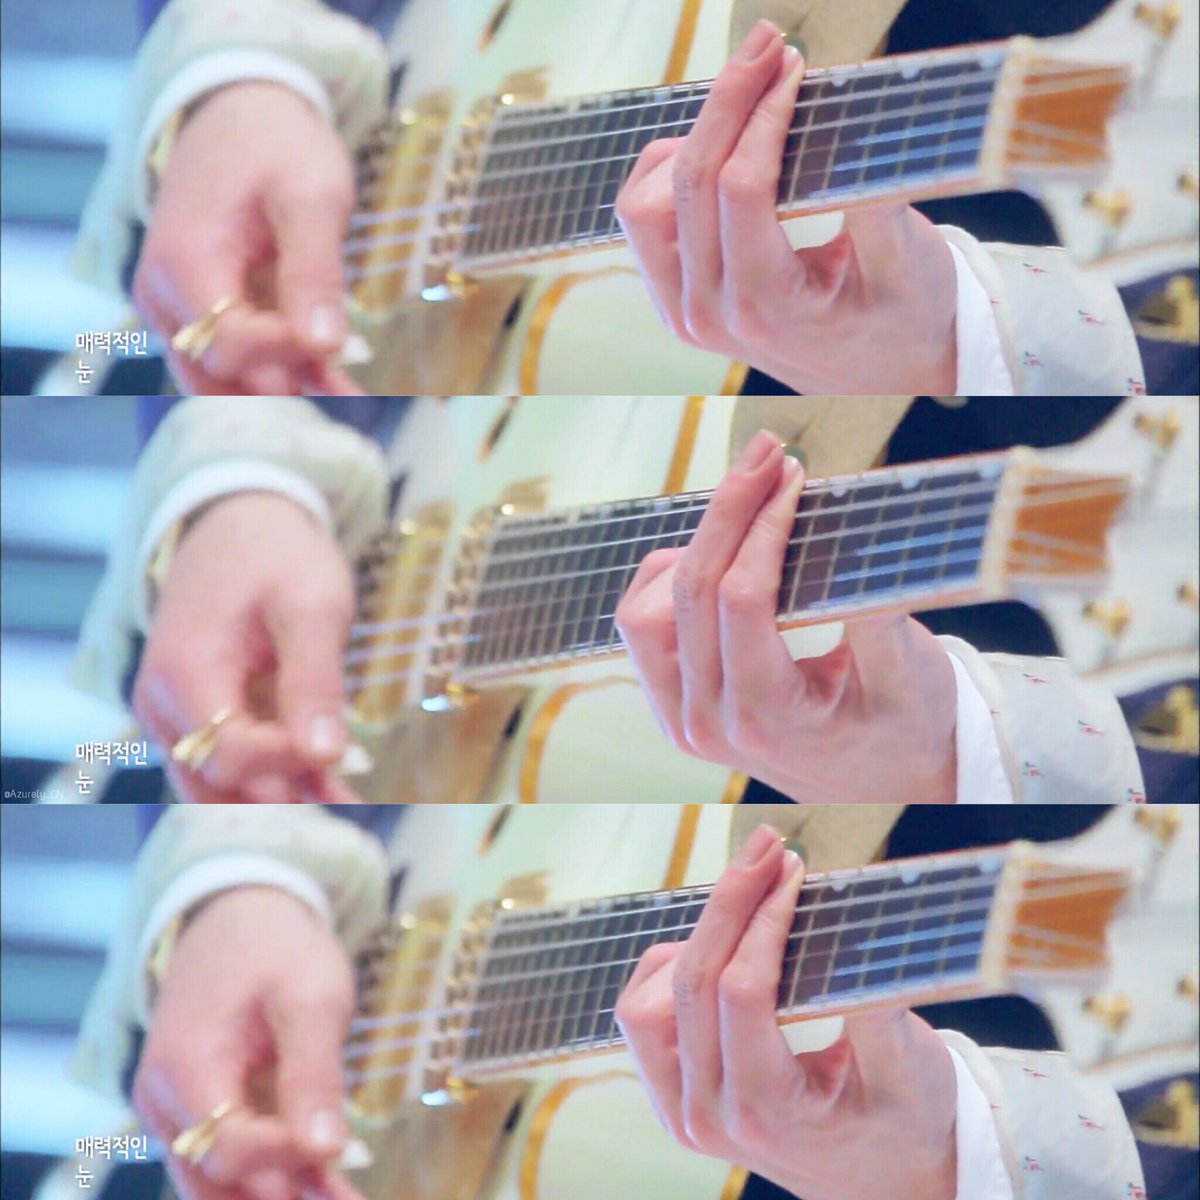 For your beautiful hands that create the best music   #HappyBirthdayJYH30th  #서른번째_정용화의_어느_멋진날  #정용화  #JungYongHwa  @JYHeffect